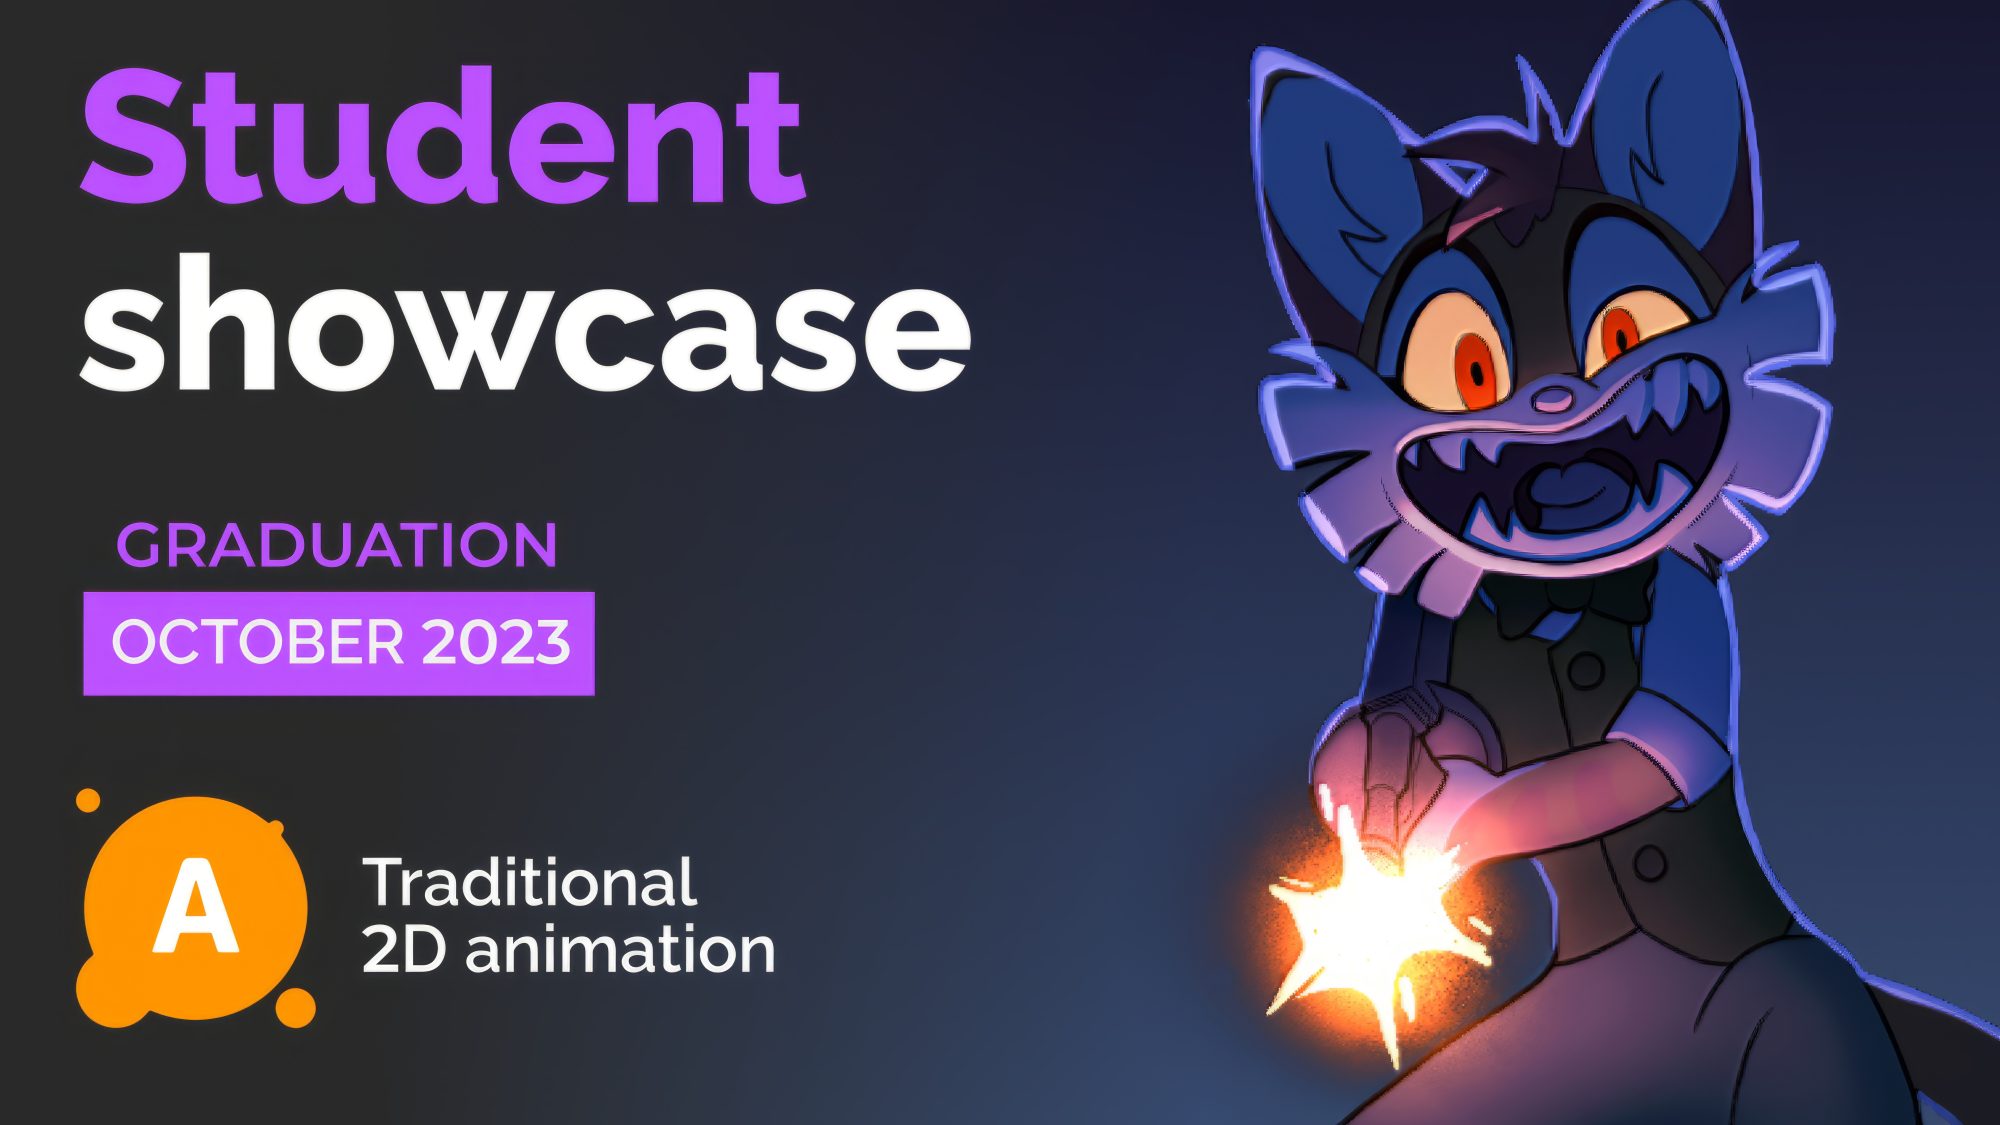 Students showcase. Traditional 2D animation. Graduation: October 2023